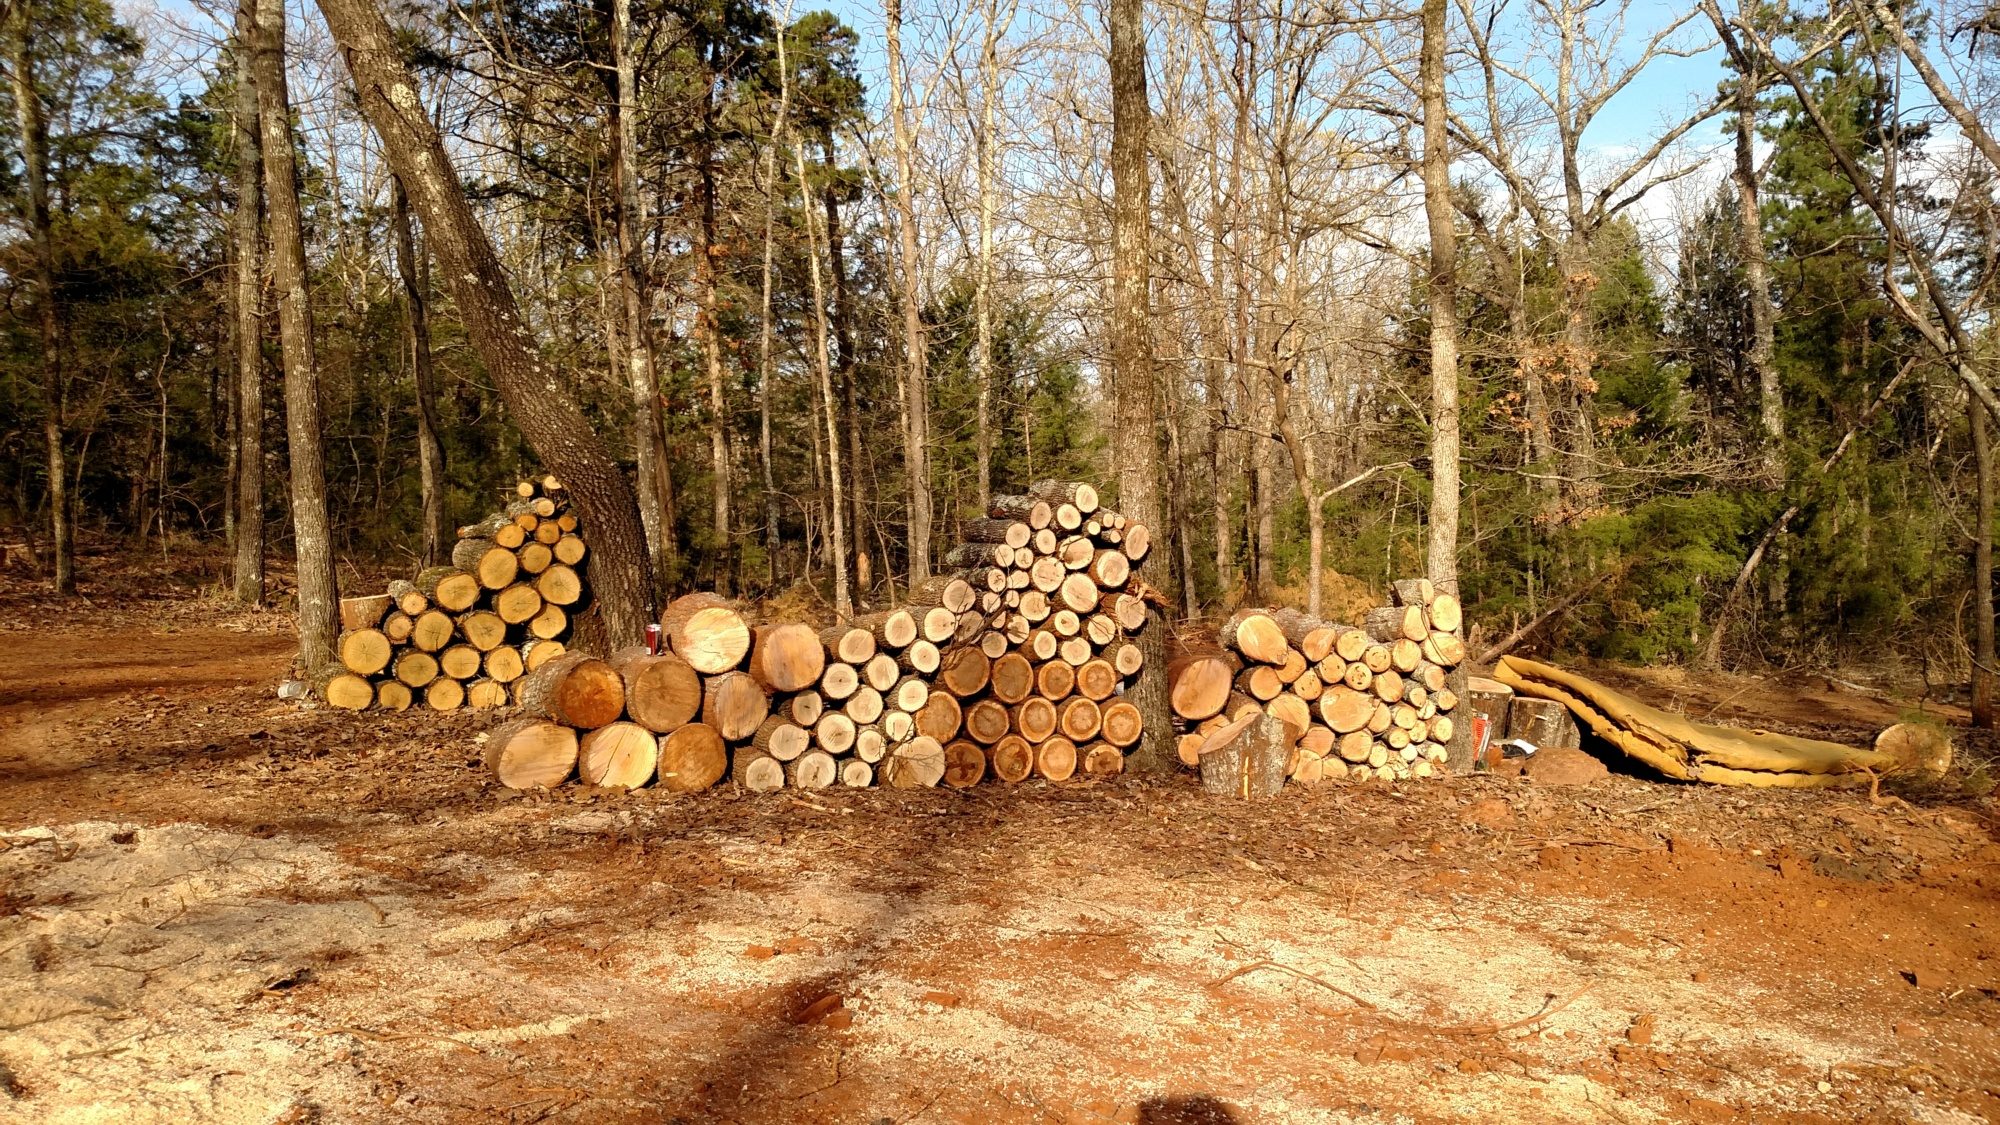 Yes, plenty of chainsawing, separating and stacking wood.